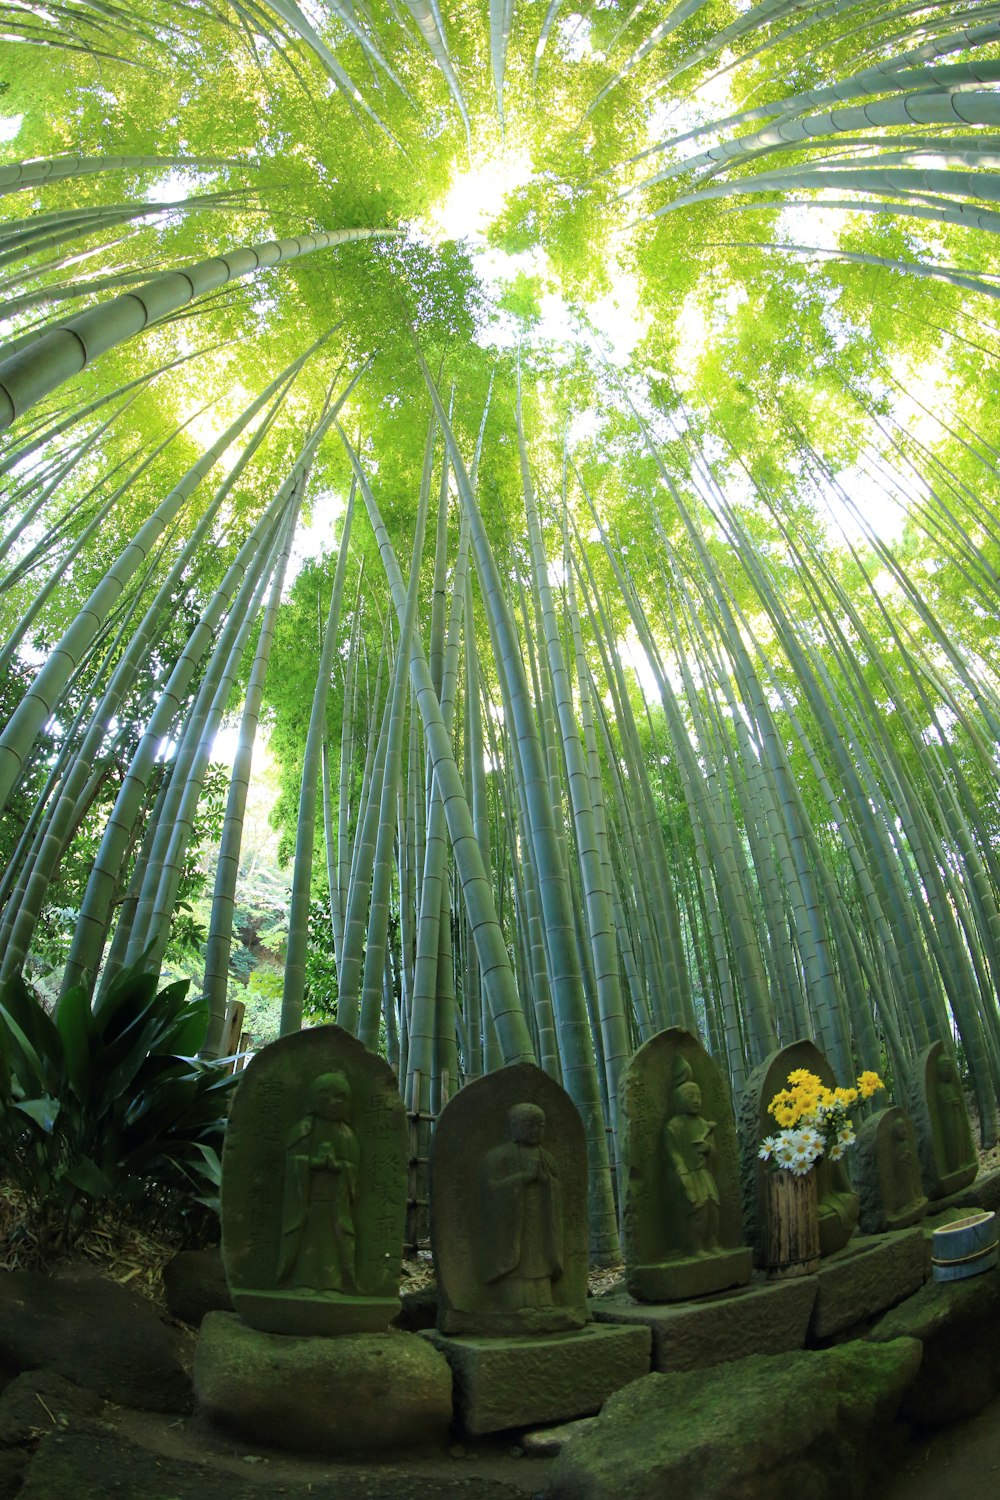 statues under bamboo trees